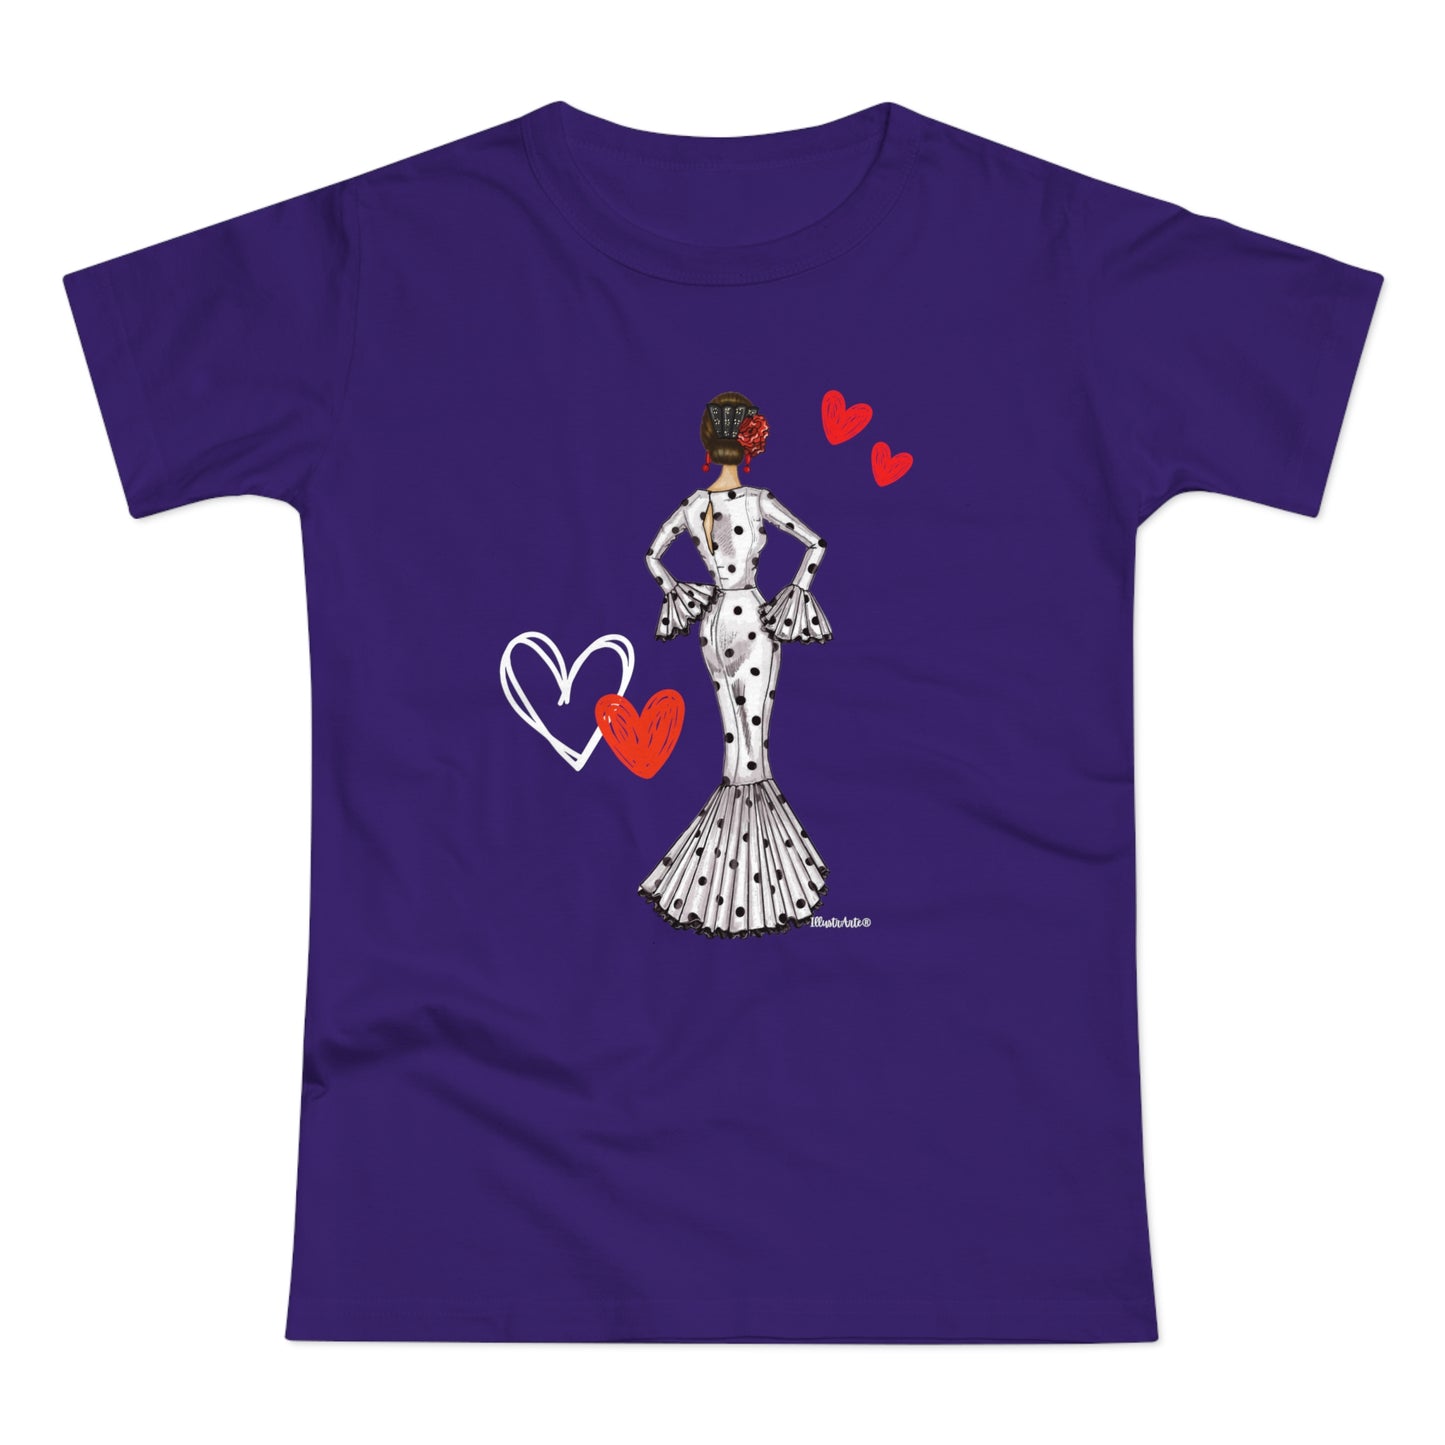 a purple t - shirt with an image of a woman in a dress and hearts